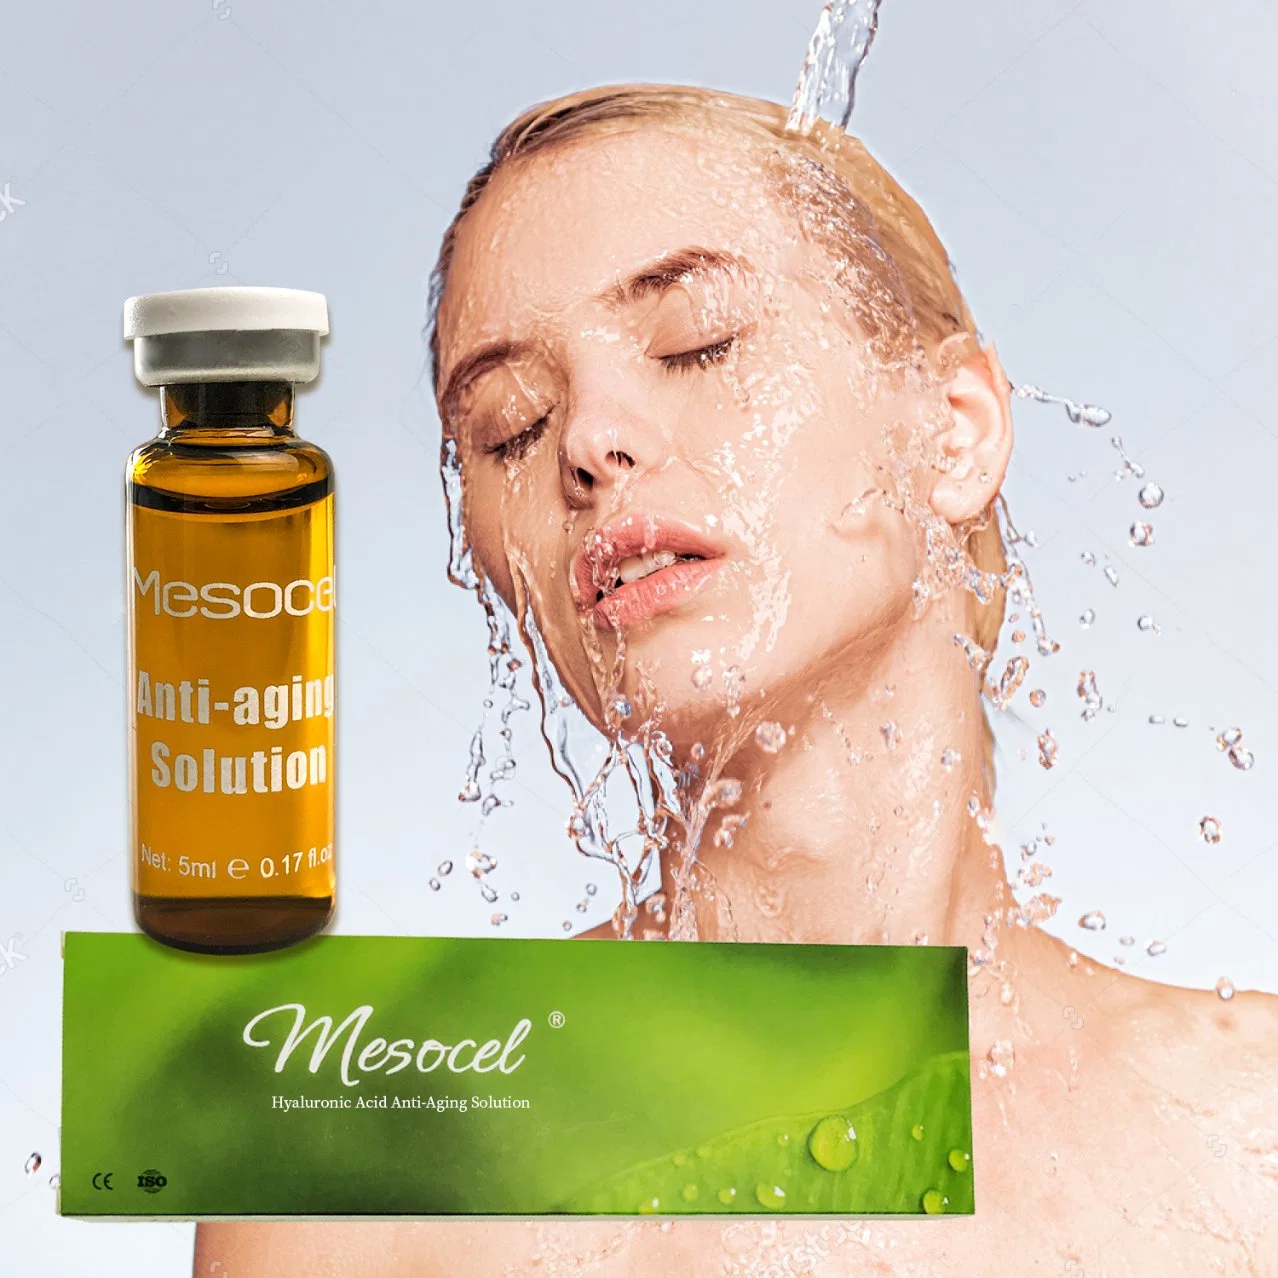 Mesocel Hyaluronic Acid Skin Booster Injectable for Mesotherapy